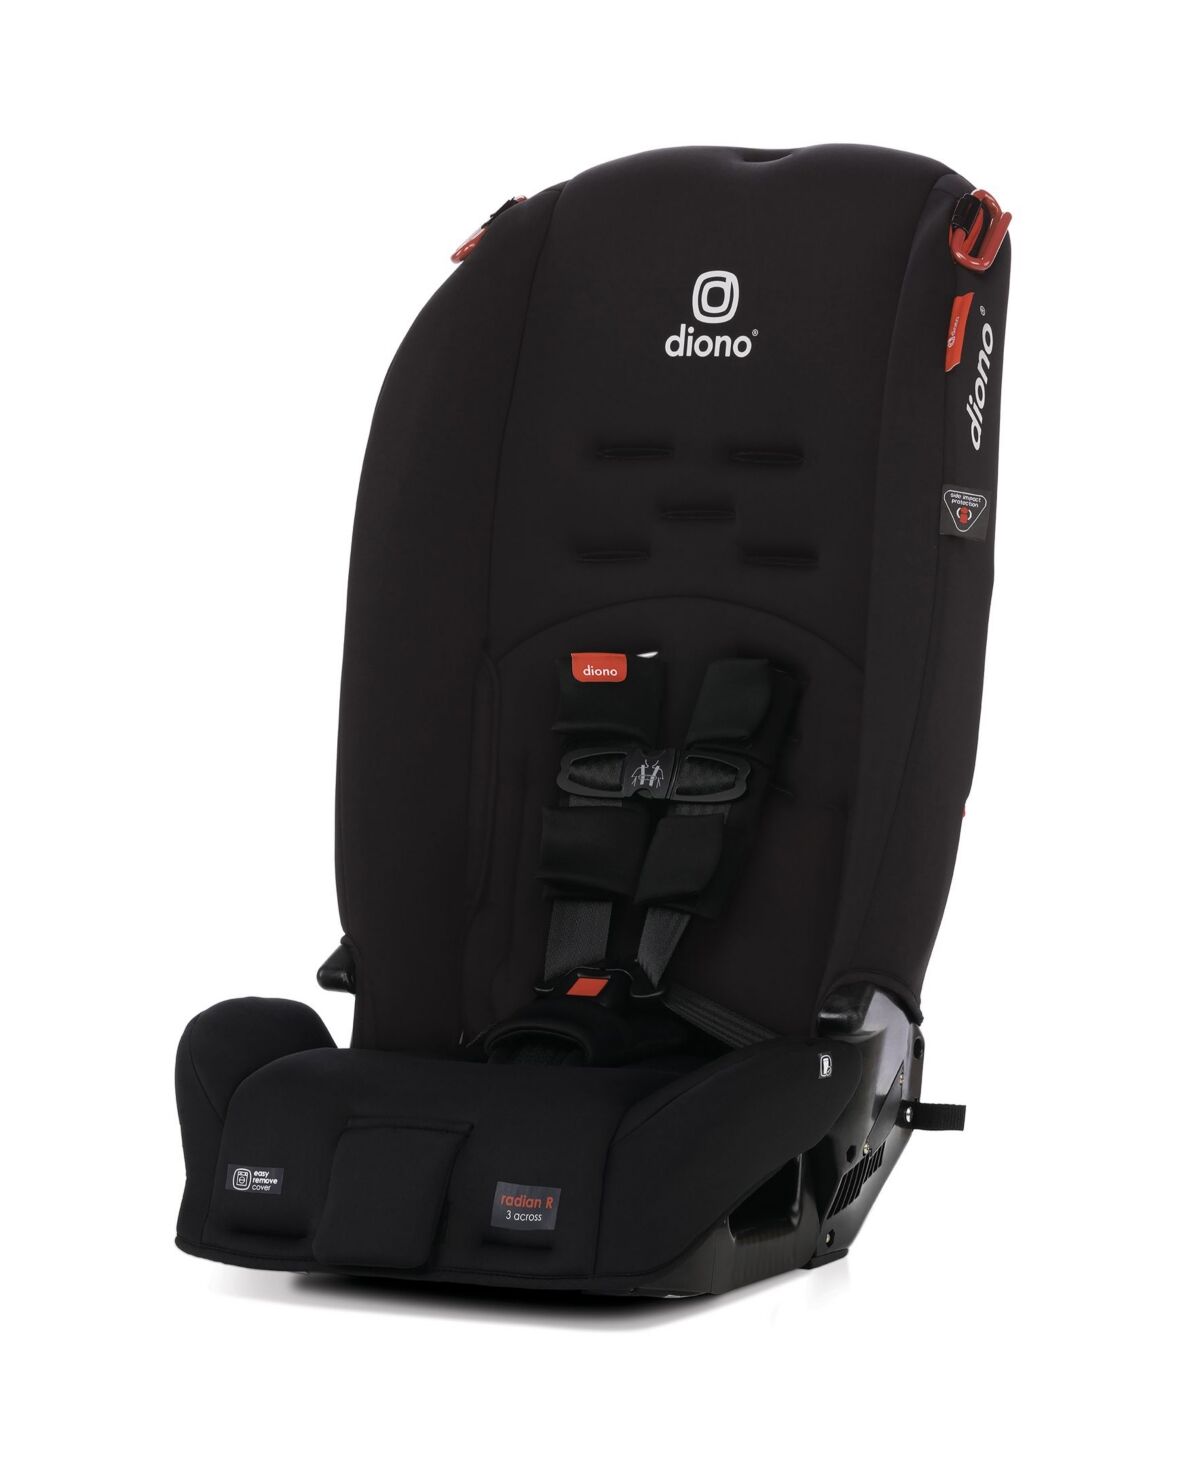 Diono Radian 3R All-in-One Convertible Car Seat and Booster - Black